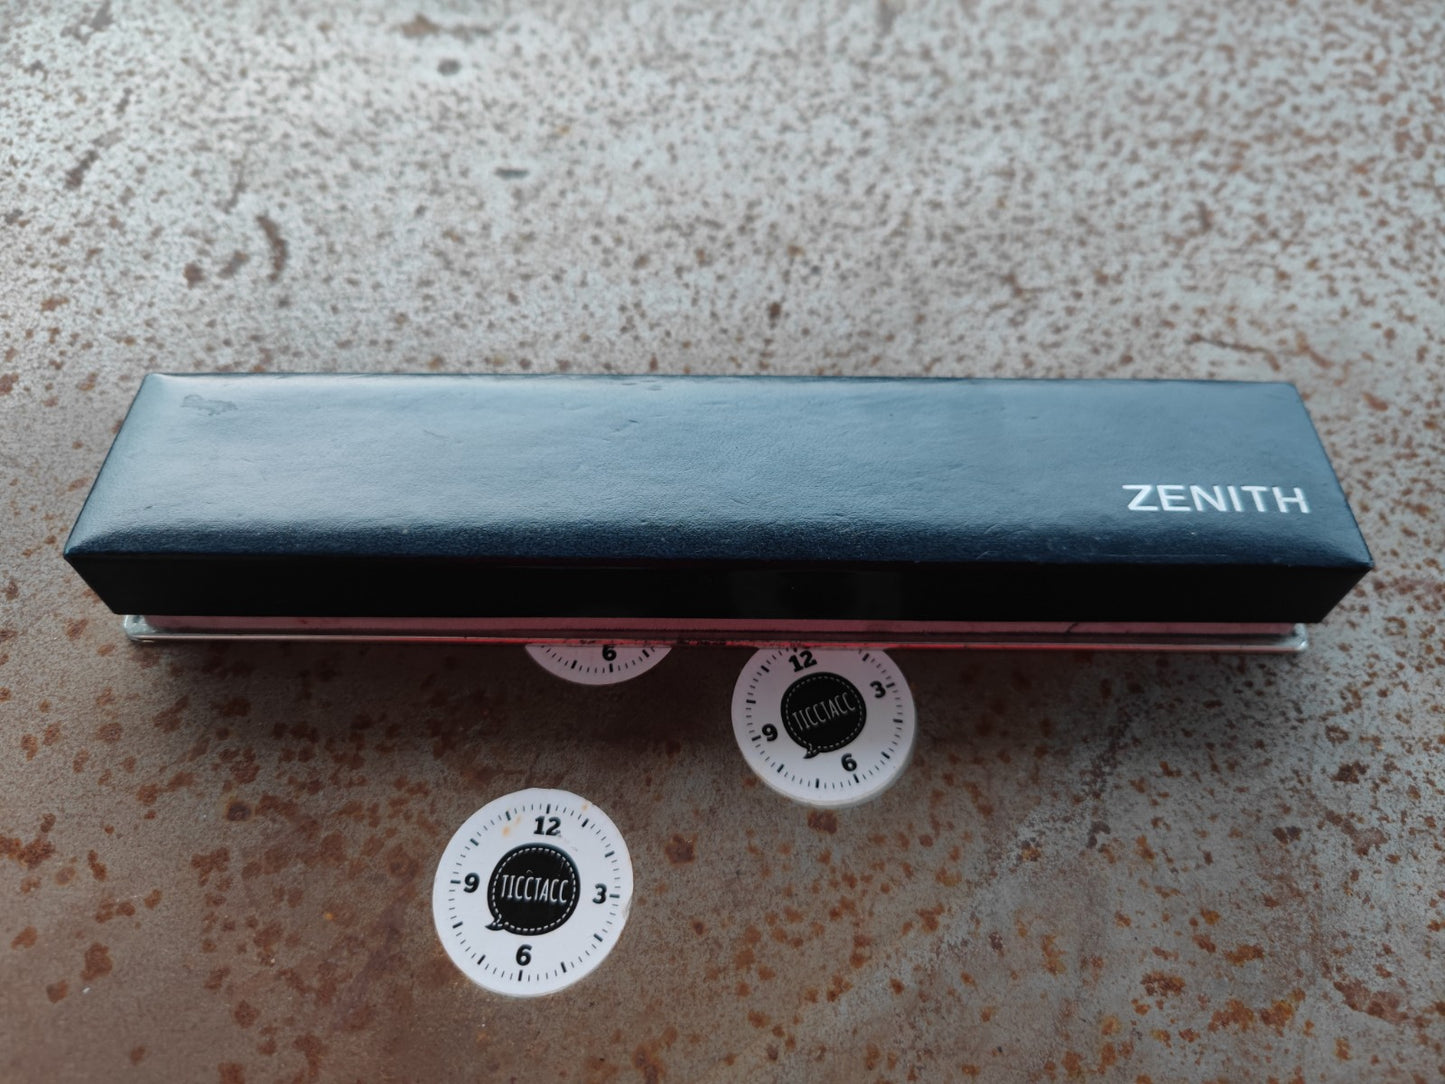 Vintage Zenith watch box for Mens models.